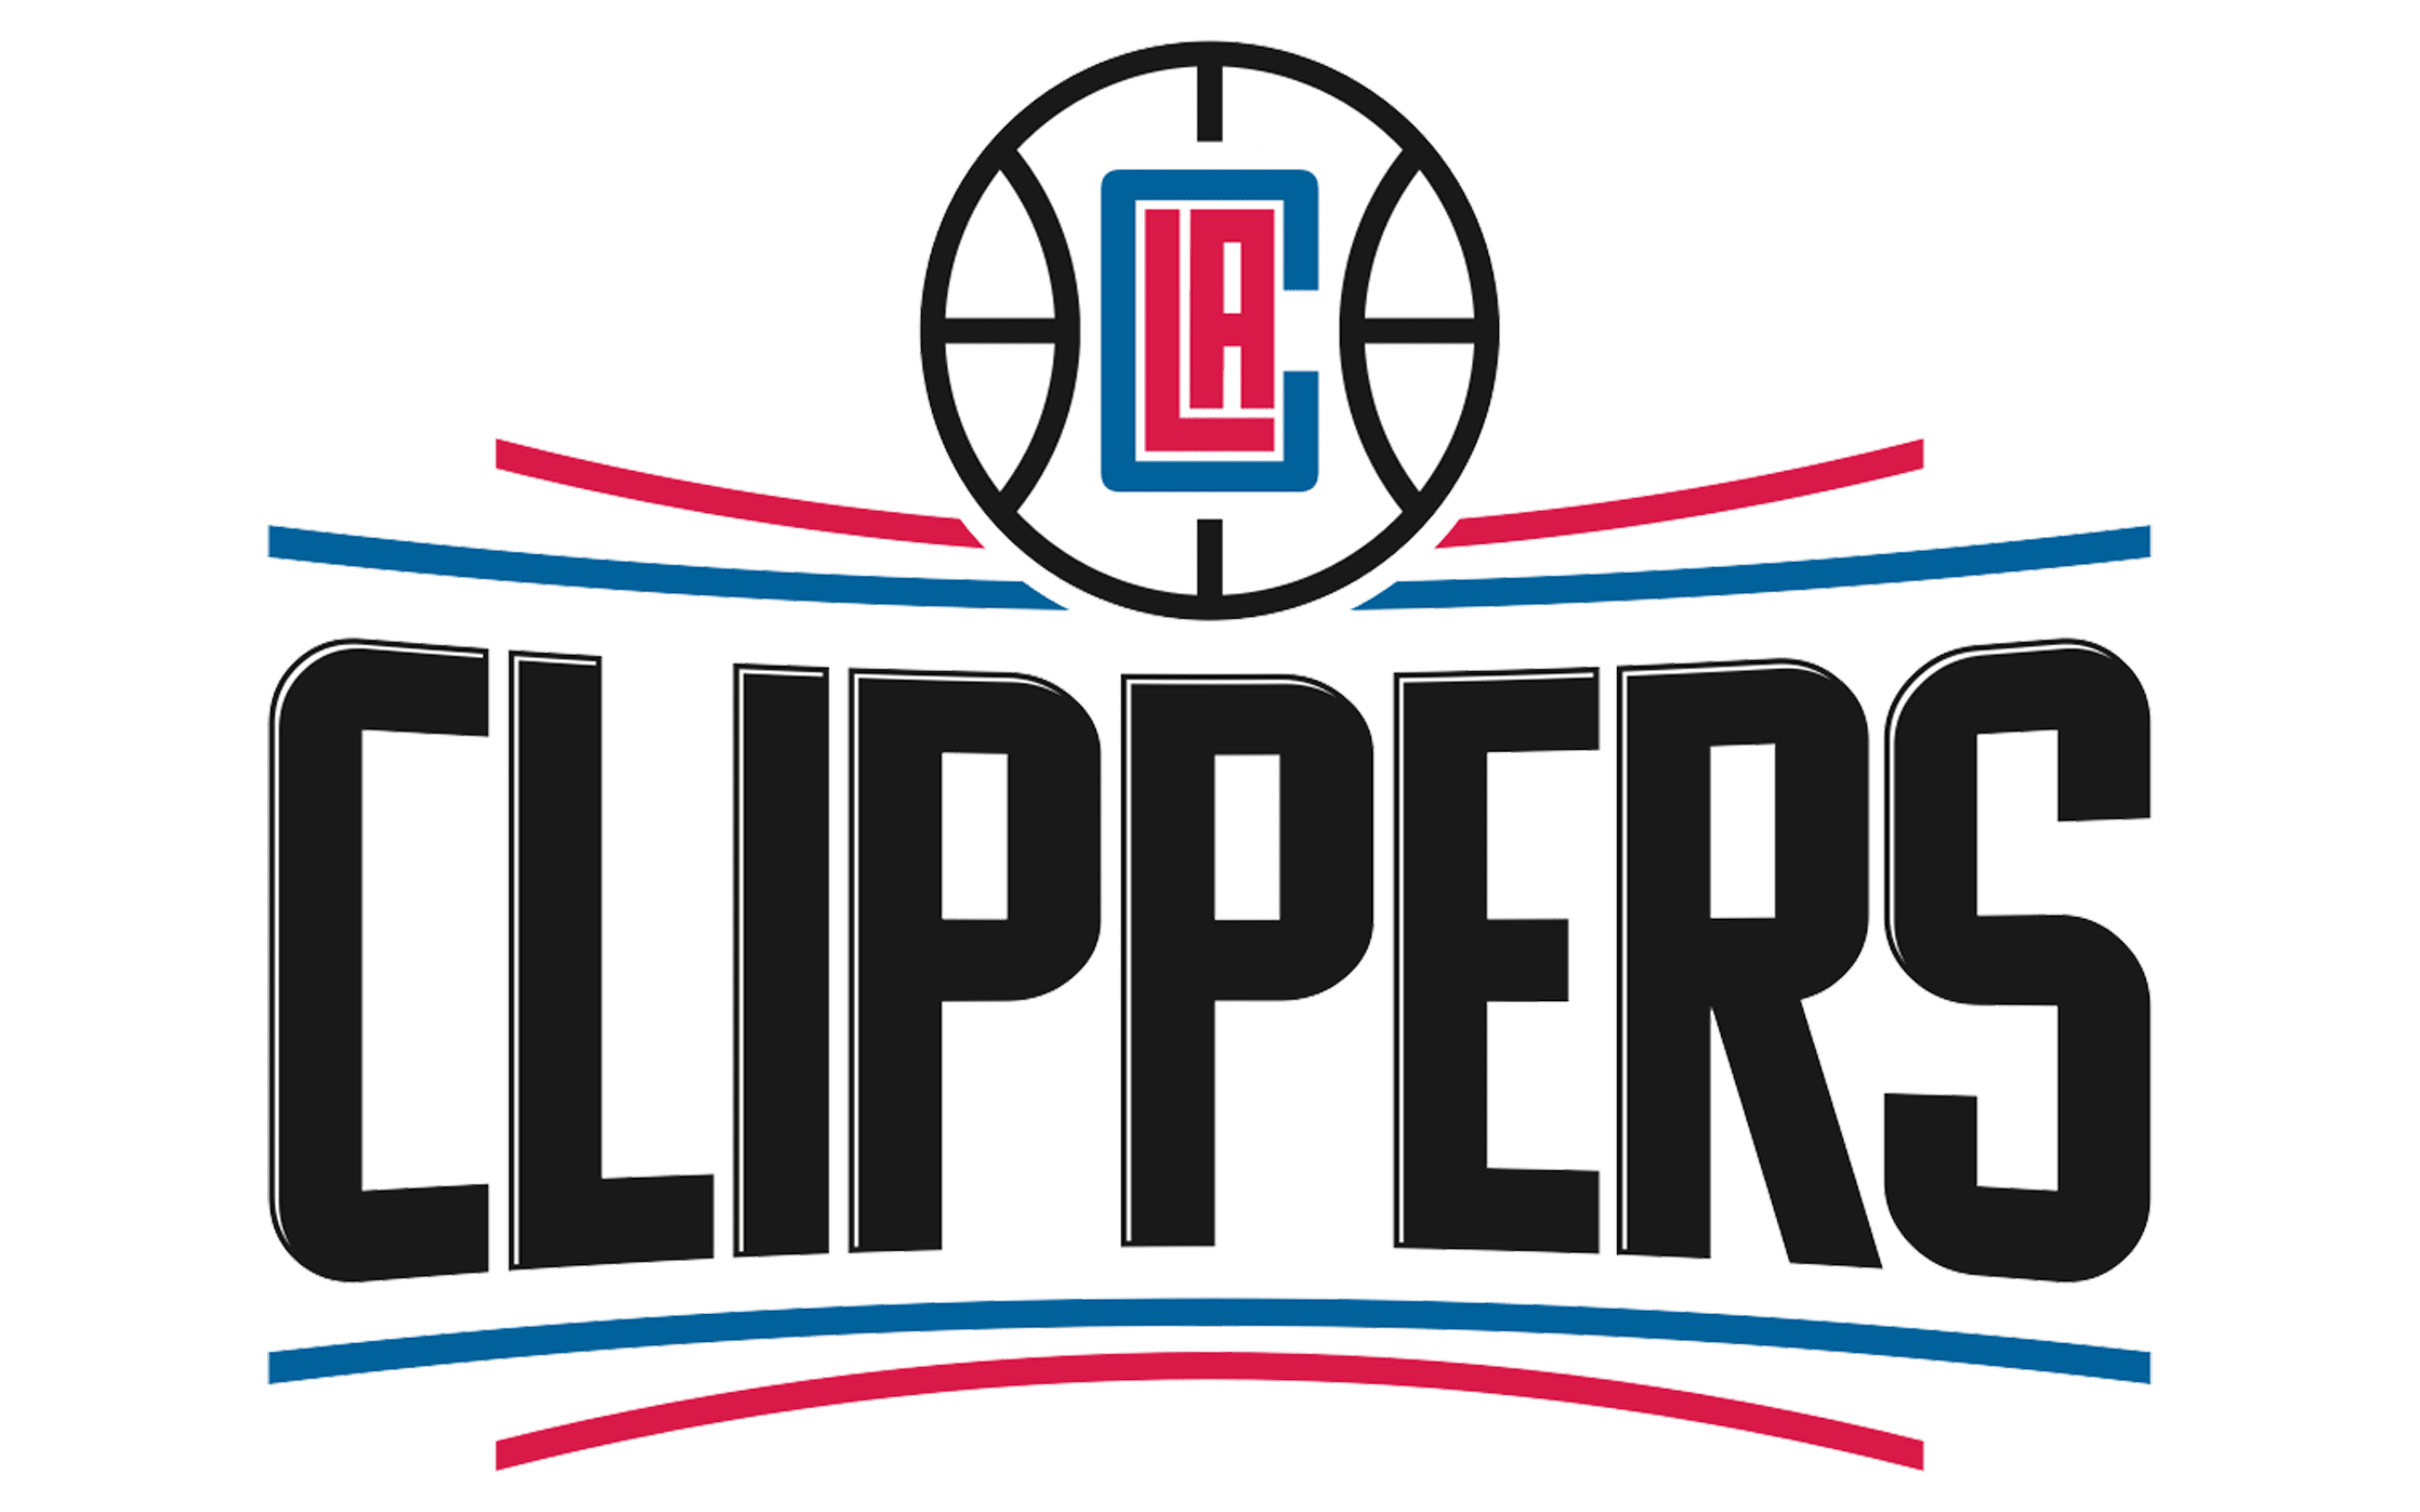 NBA: Clippers beat Lakers in Los Angeles and Enes Kanter plays outside the  US - BBC Sport